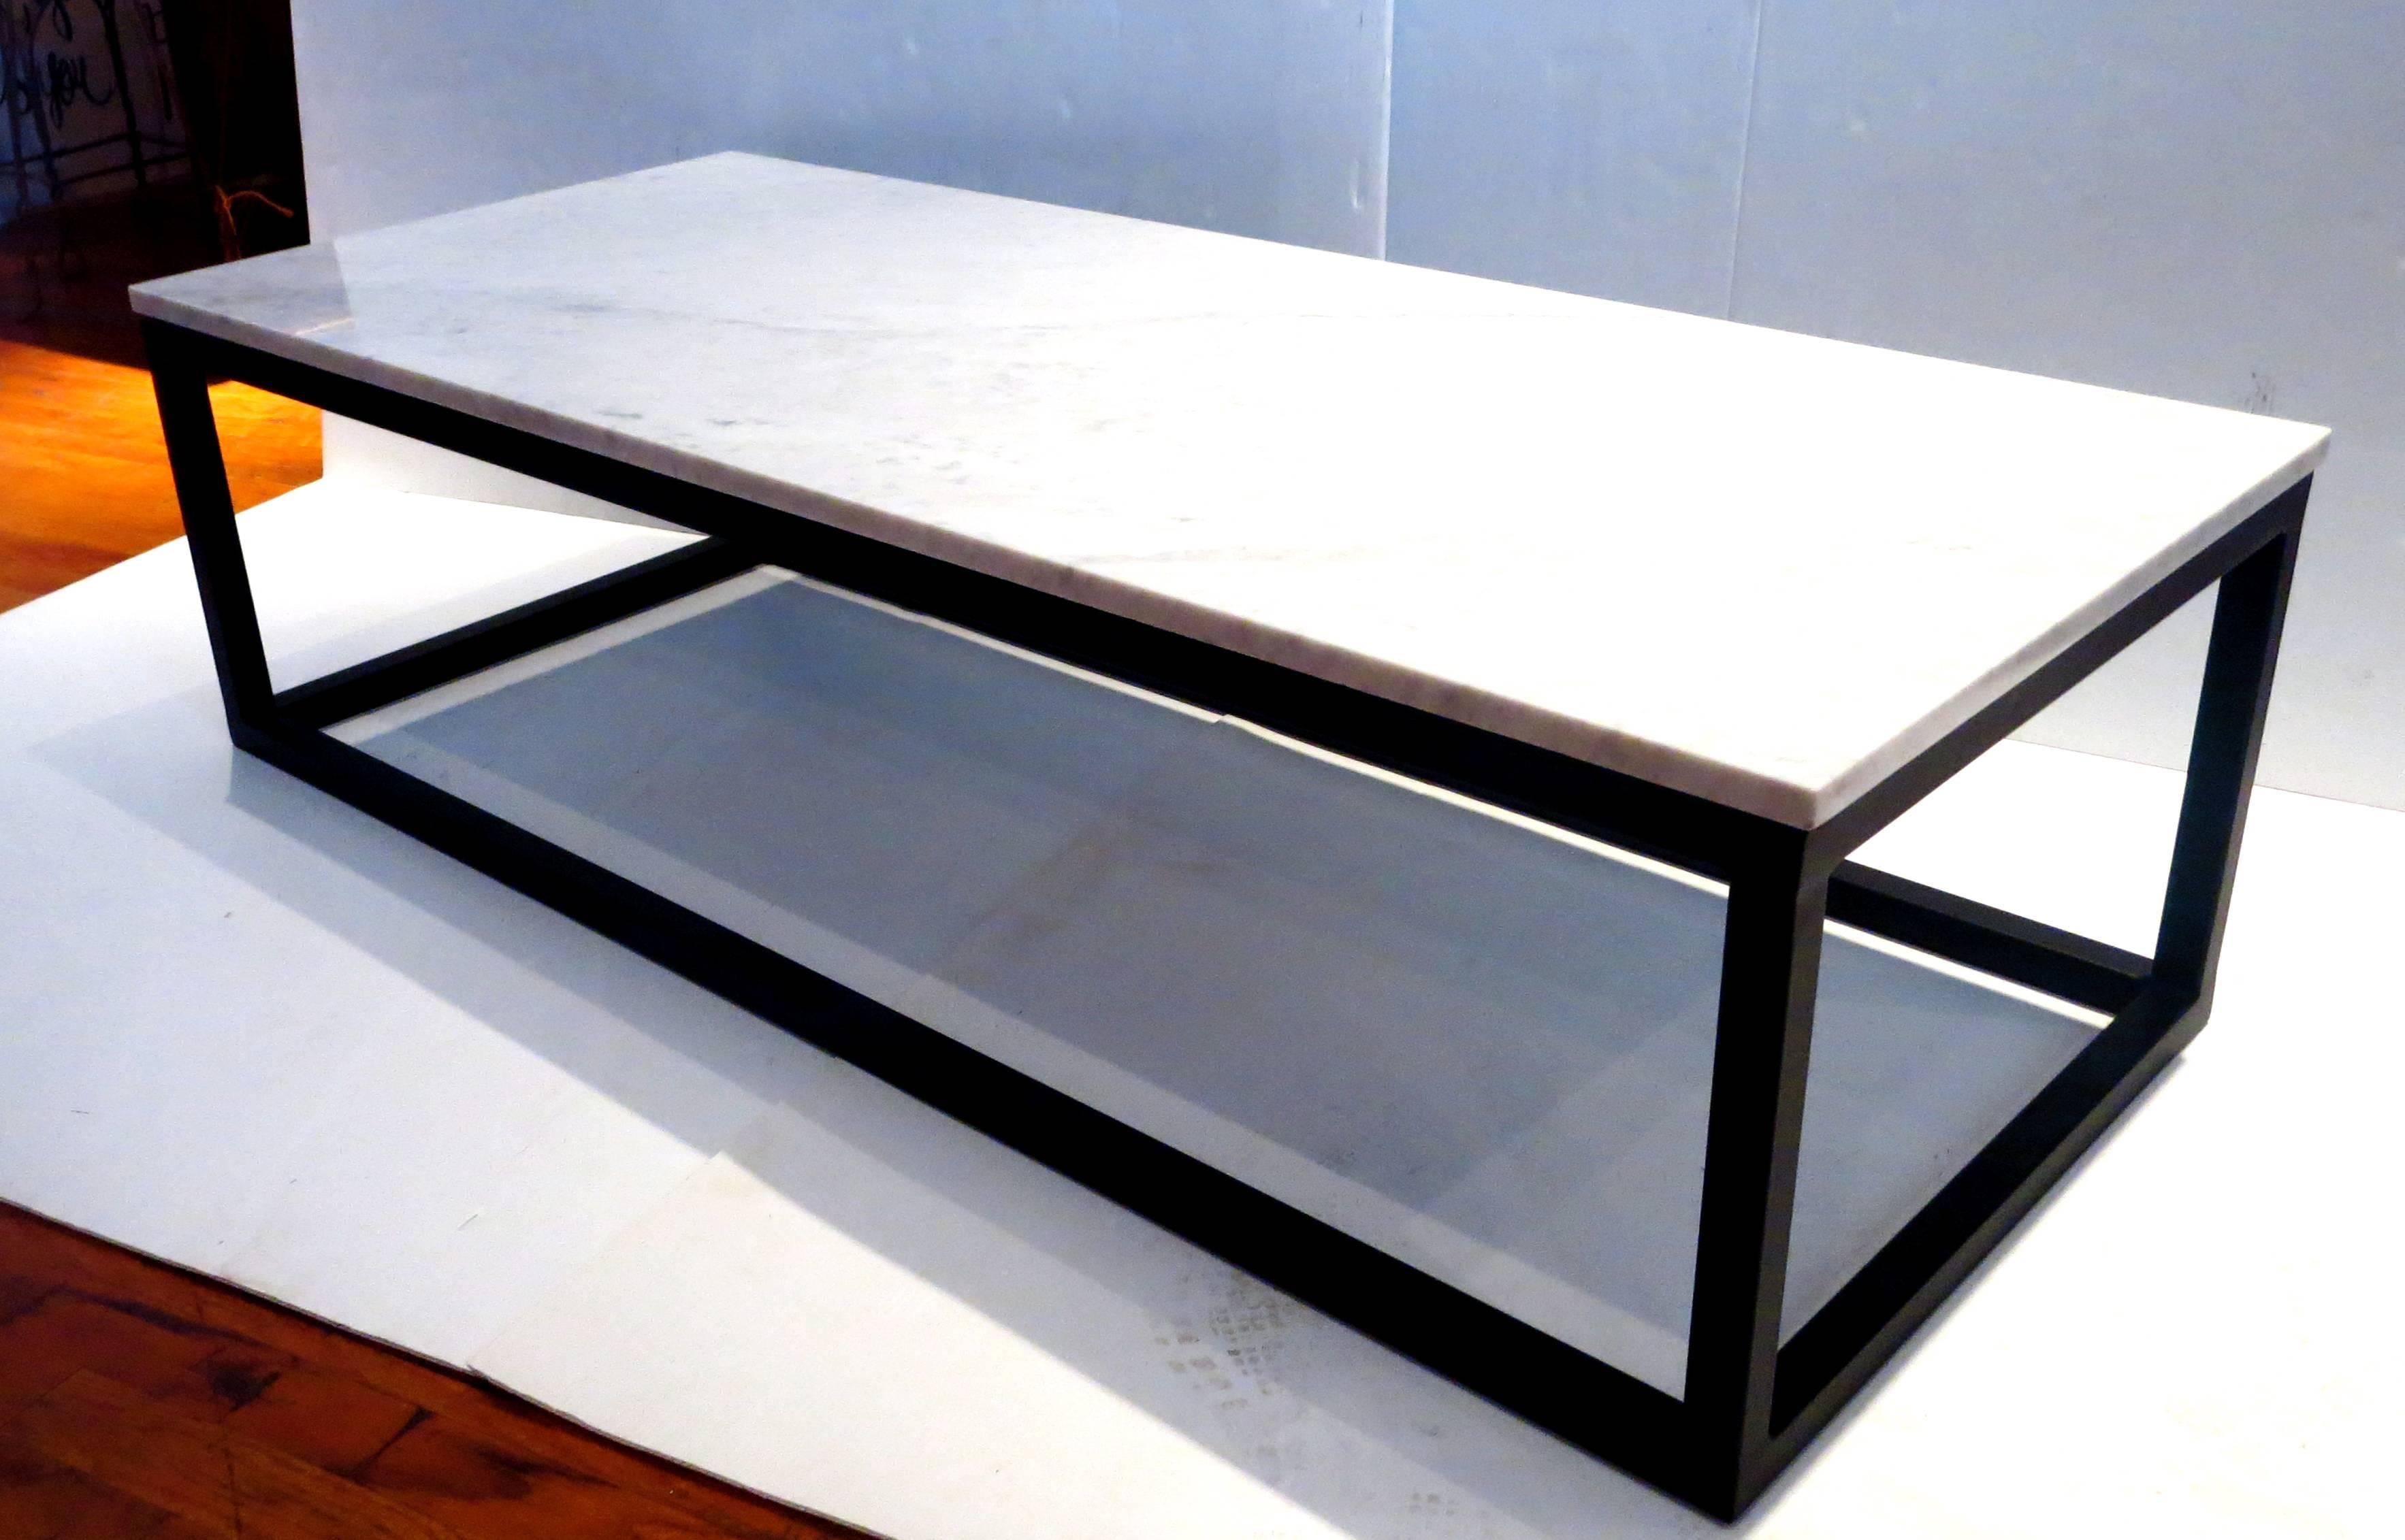 1970s rectangle coffee table, solid Italian white marble top sitting on square metal tube base, the base has been sand blasted and powder coated in flat black the top its polished with no chips or cracks and sits on top of the base, solid and sturdy.